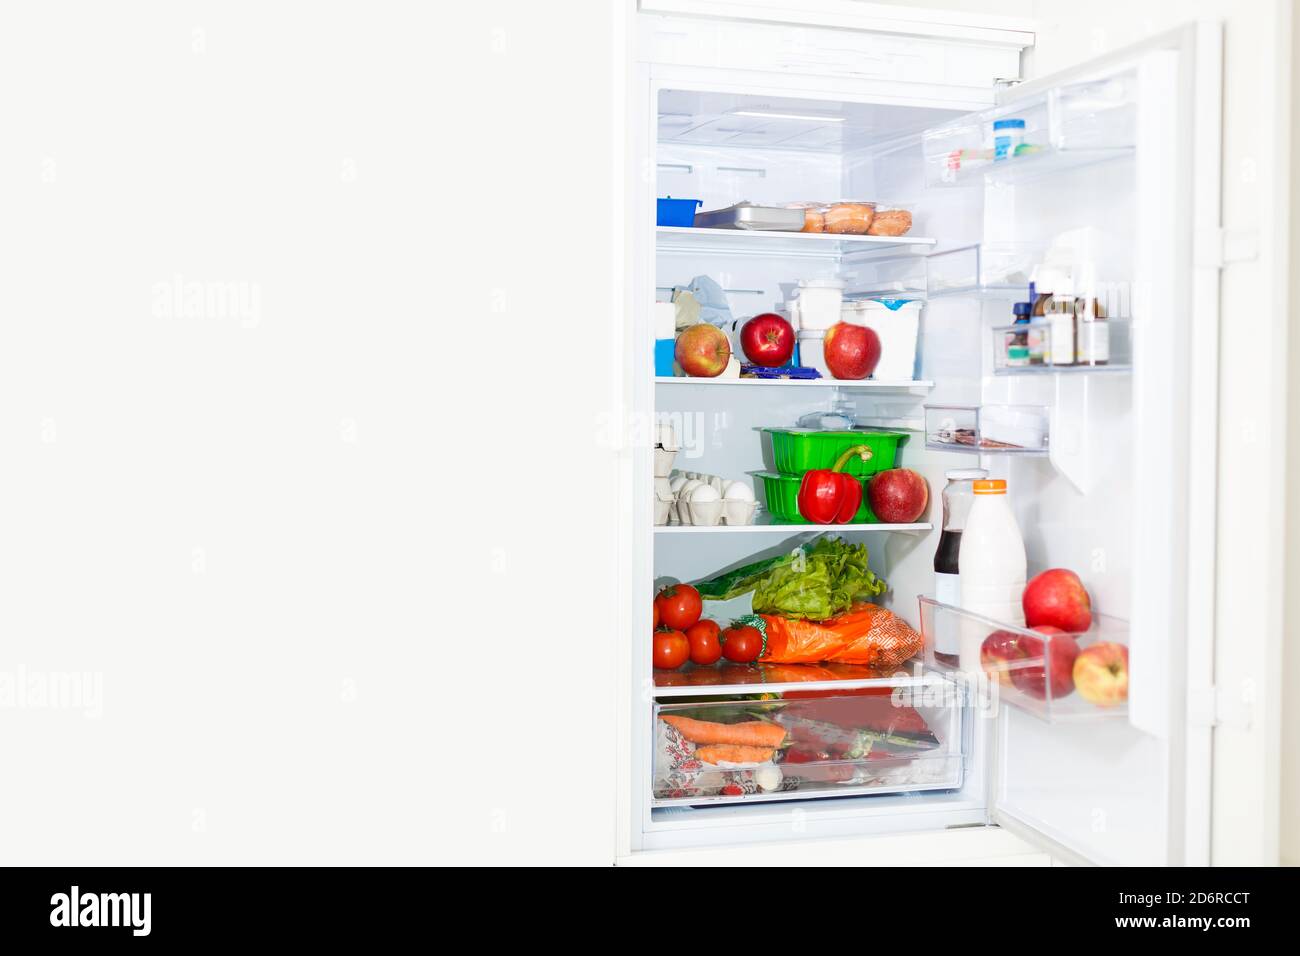 Top freezer kitchen refrigerator with doors open and shelves full of groceries with fresh and frozen food and cold bottles Stock Photo